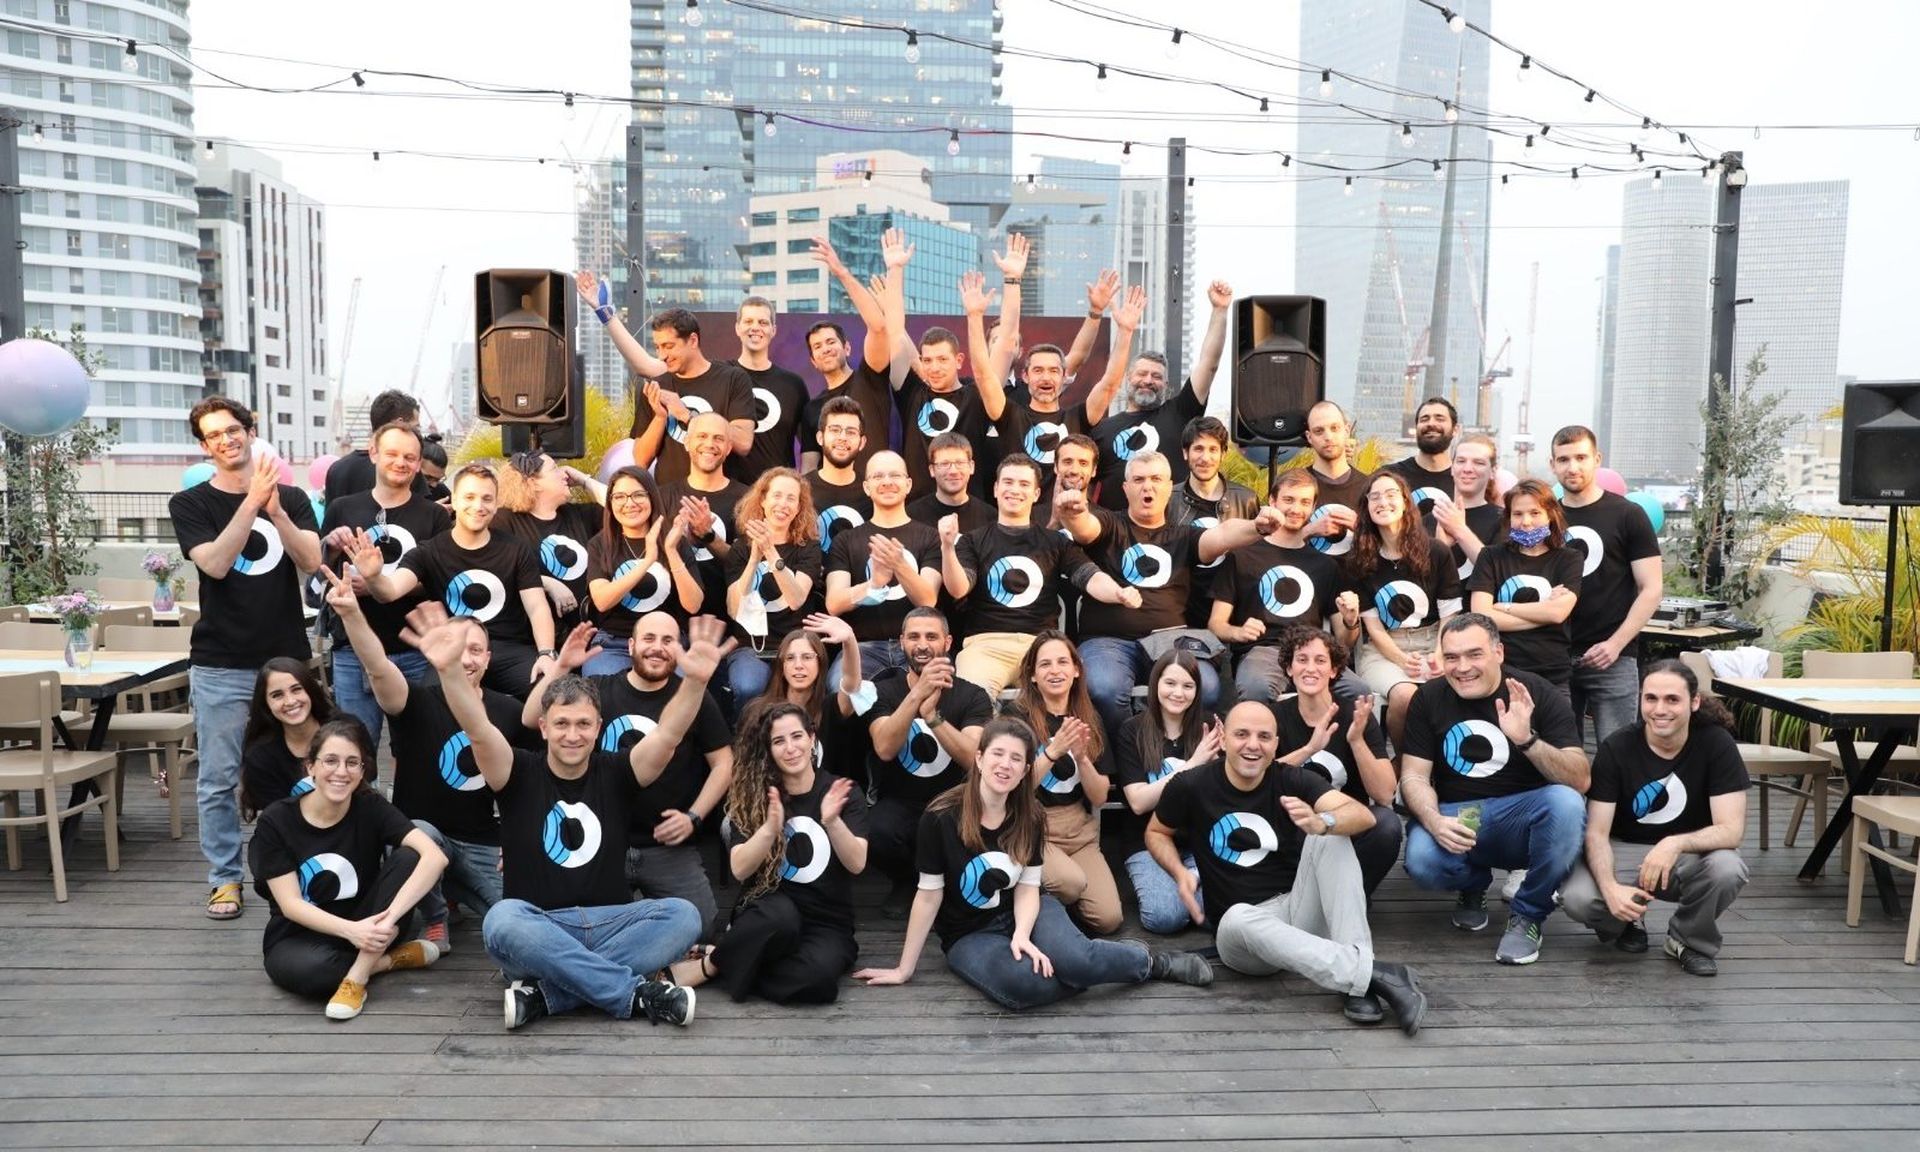 Orca went from a small outfit of twenty people all working in the same office to nearly 100 employees around the world in the past year. (Orca)